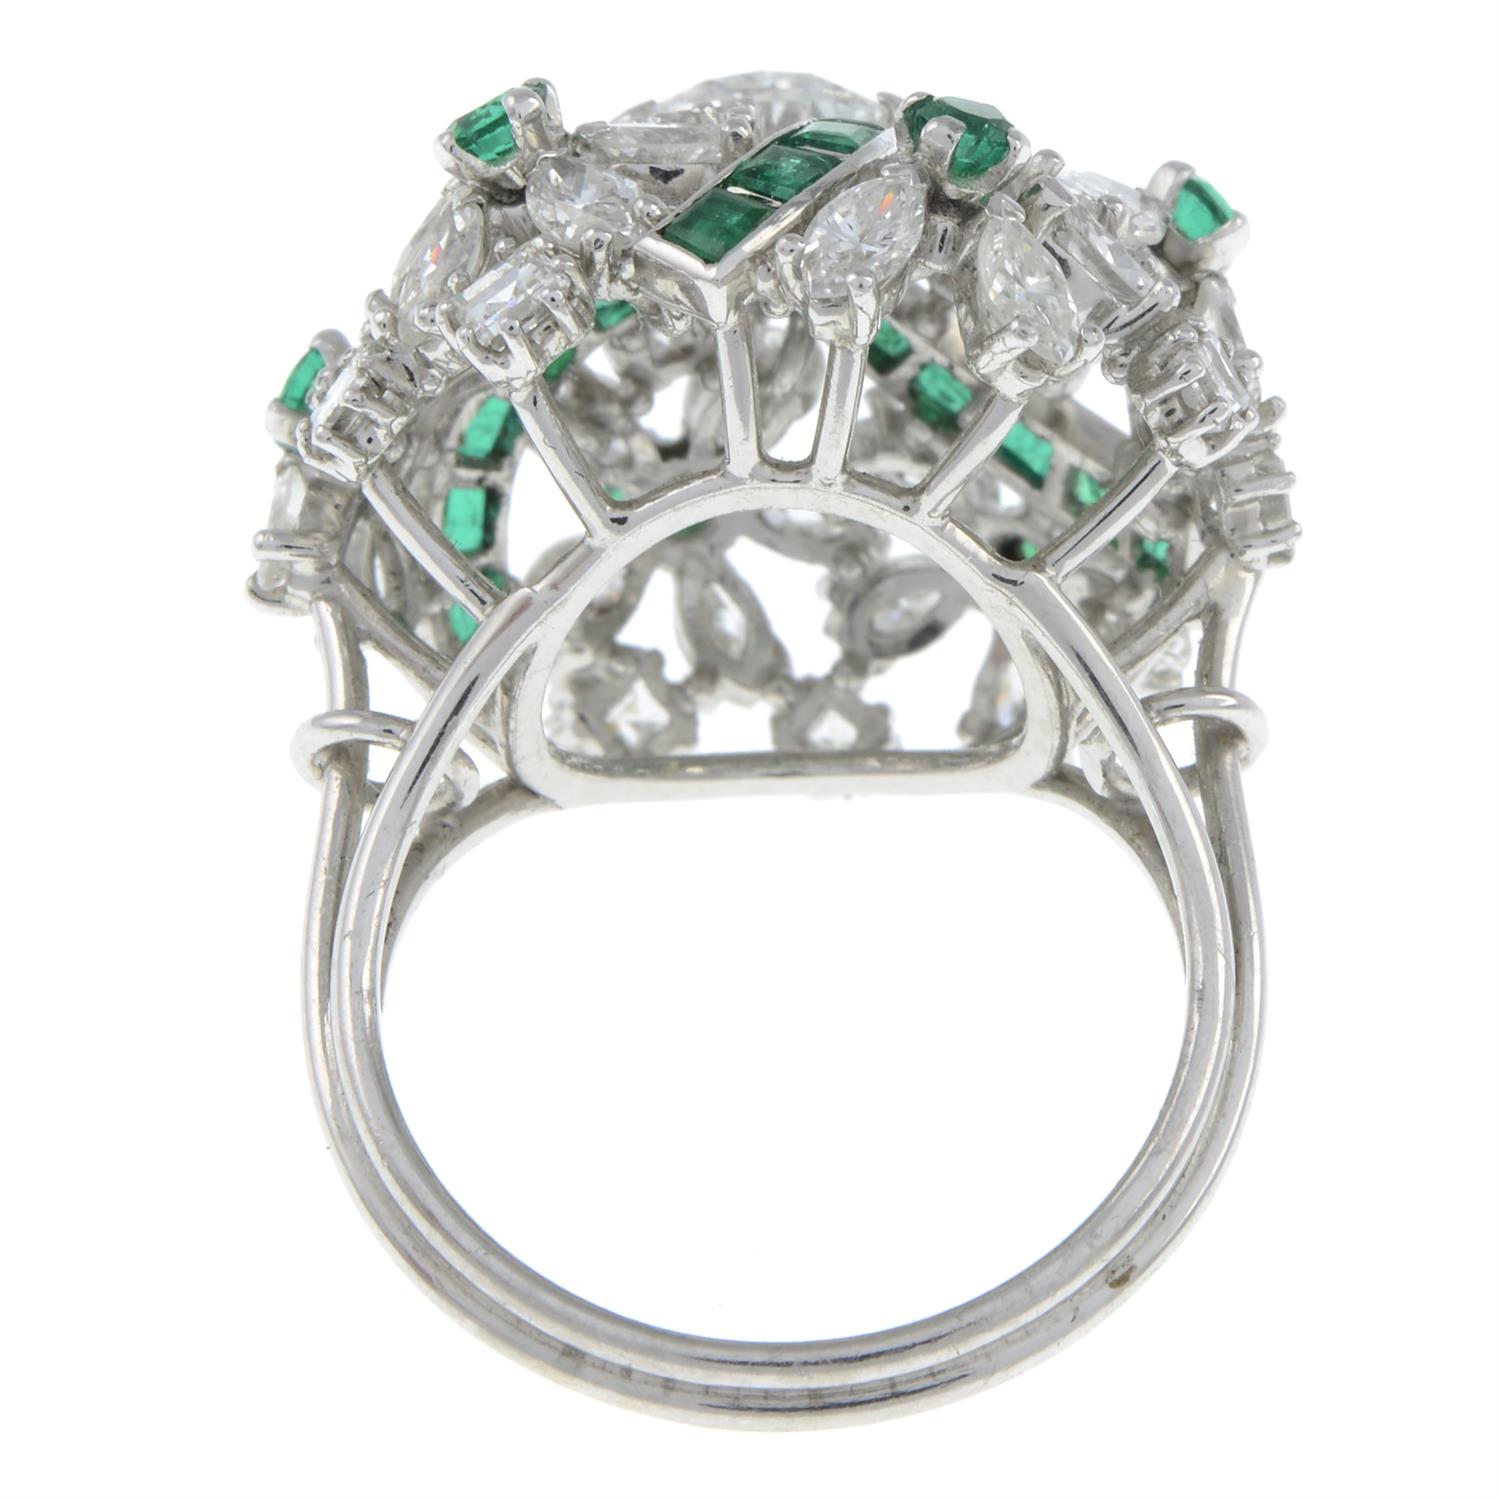 Mid 20th century platinum diamond and emerald floral ring - Image 3 of 6